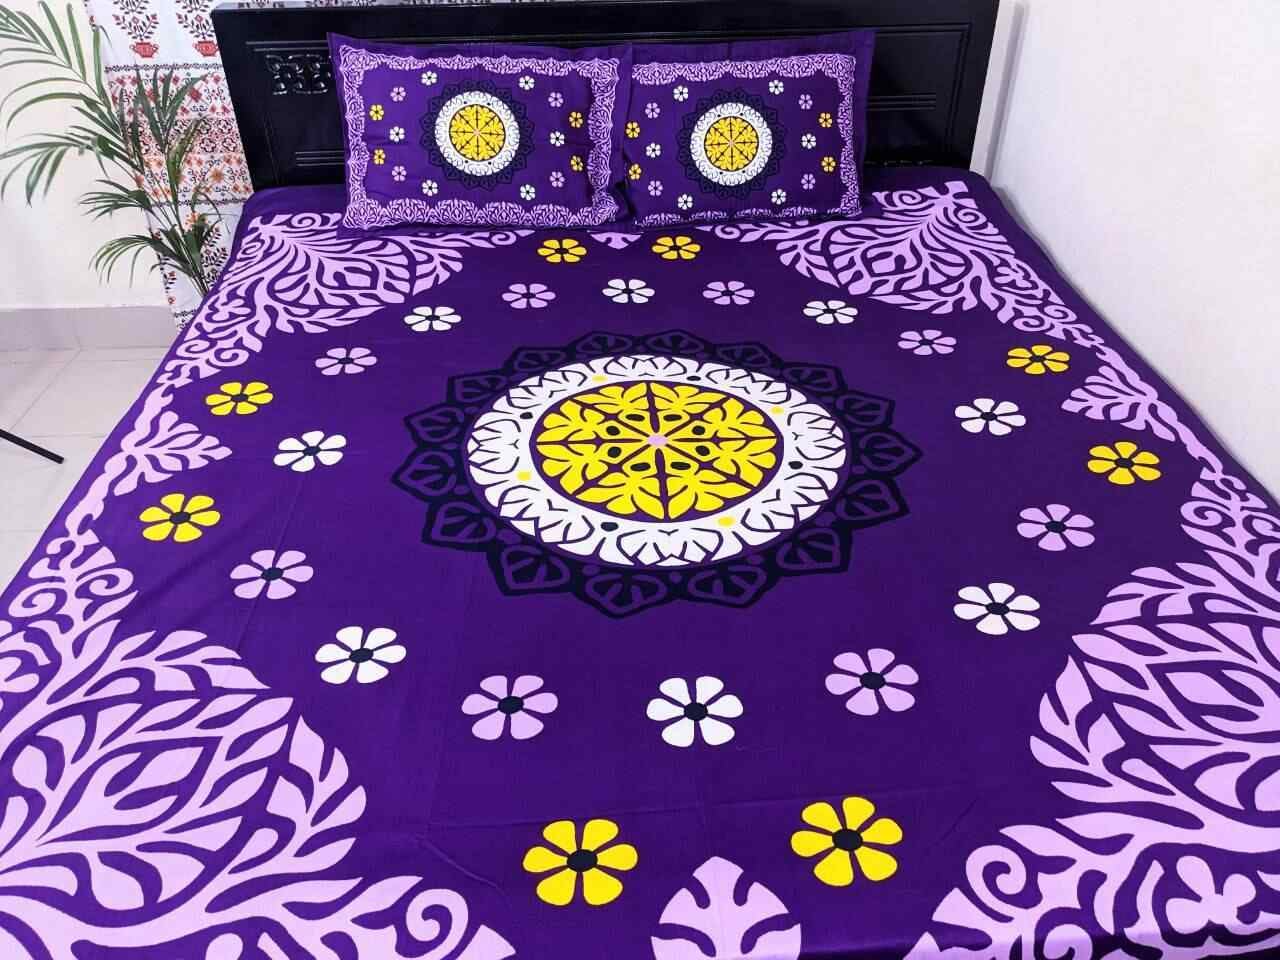 100% Cotton King Size Bedsheet New Collection	( Parpel color )  (৩ পিসের সেট)